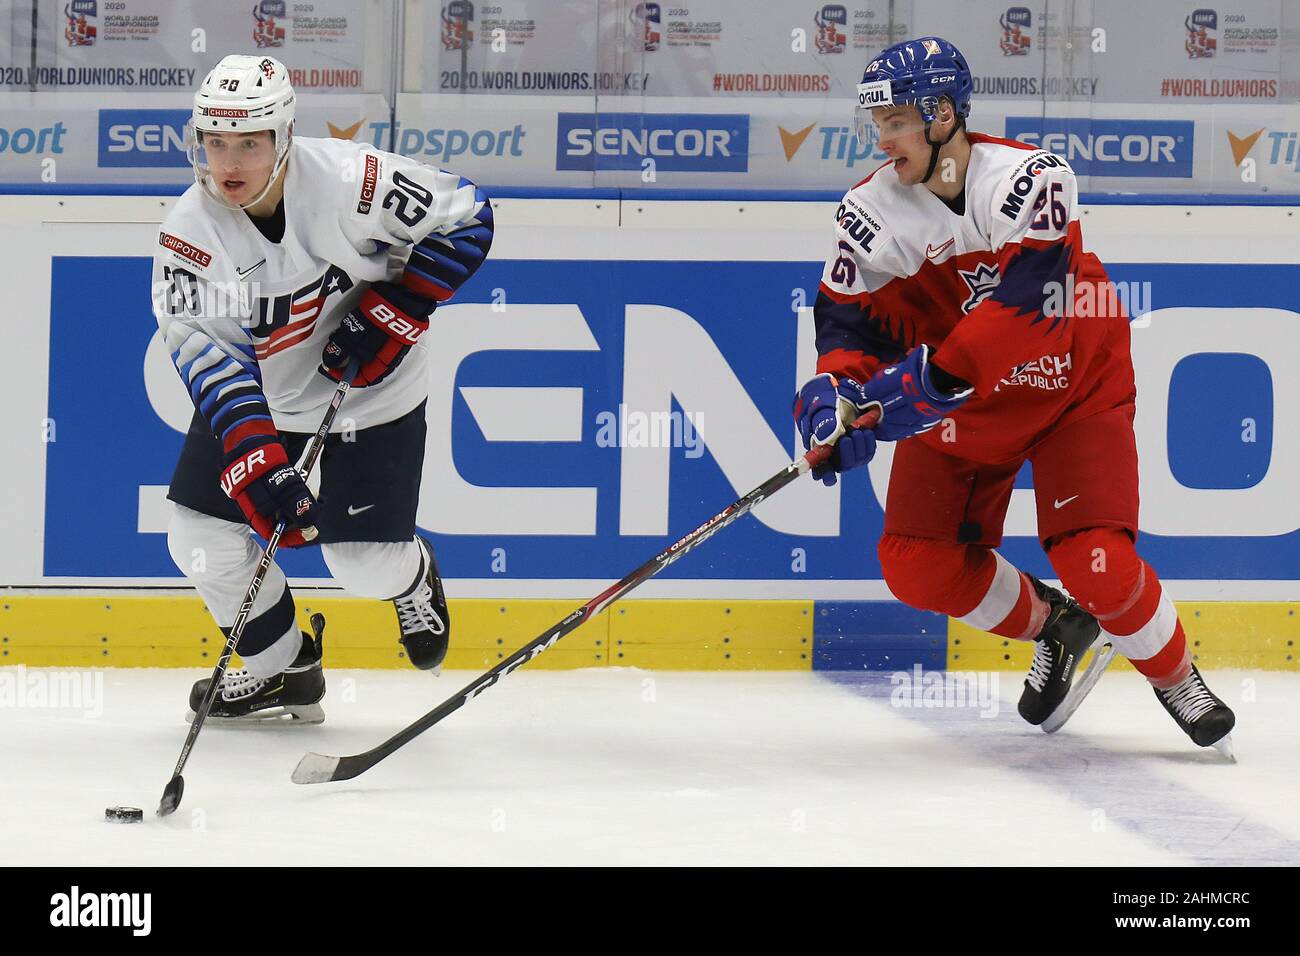 L-R Parker Ford (USA) and Adam Raska (CZE) in action during the 2020 IIHF World Junior Ice Hockey Championships Group B match between USA and Czech Re Stock Photo